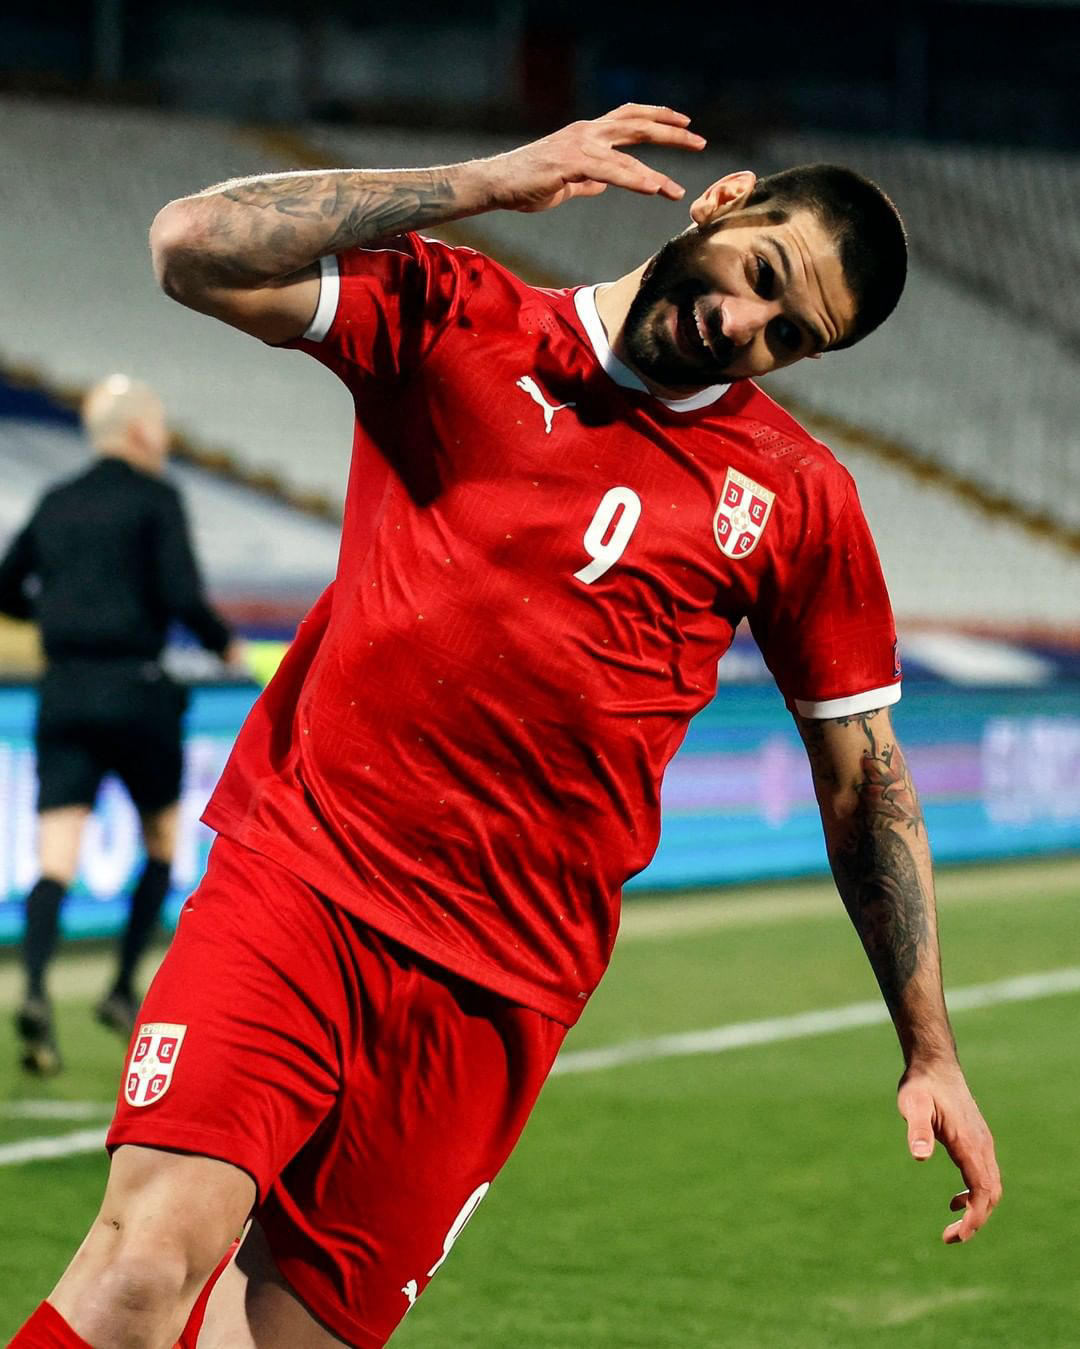 UEFA EURO 2024 - 🇷🇸 Aleksandar Mitrović has now scored 5 goals in his first 5 games back in the Pr